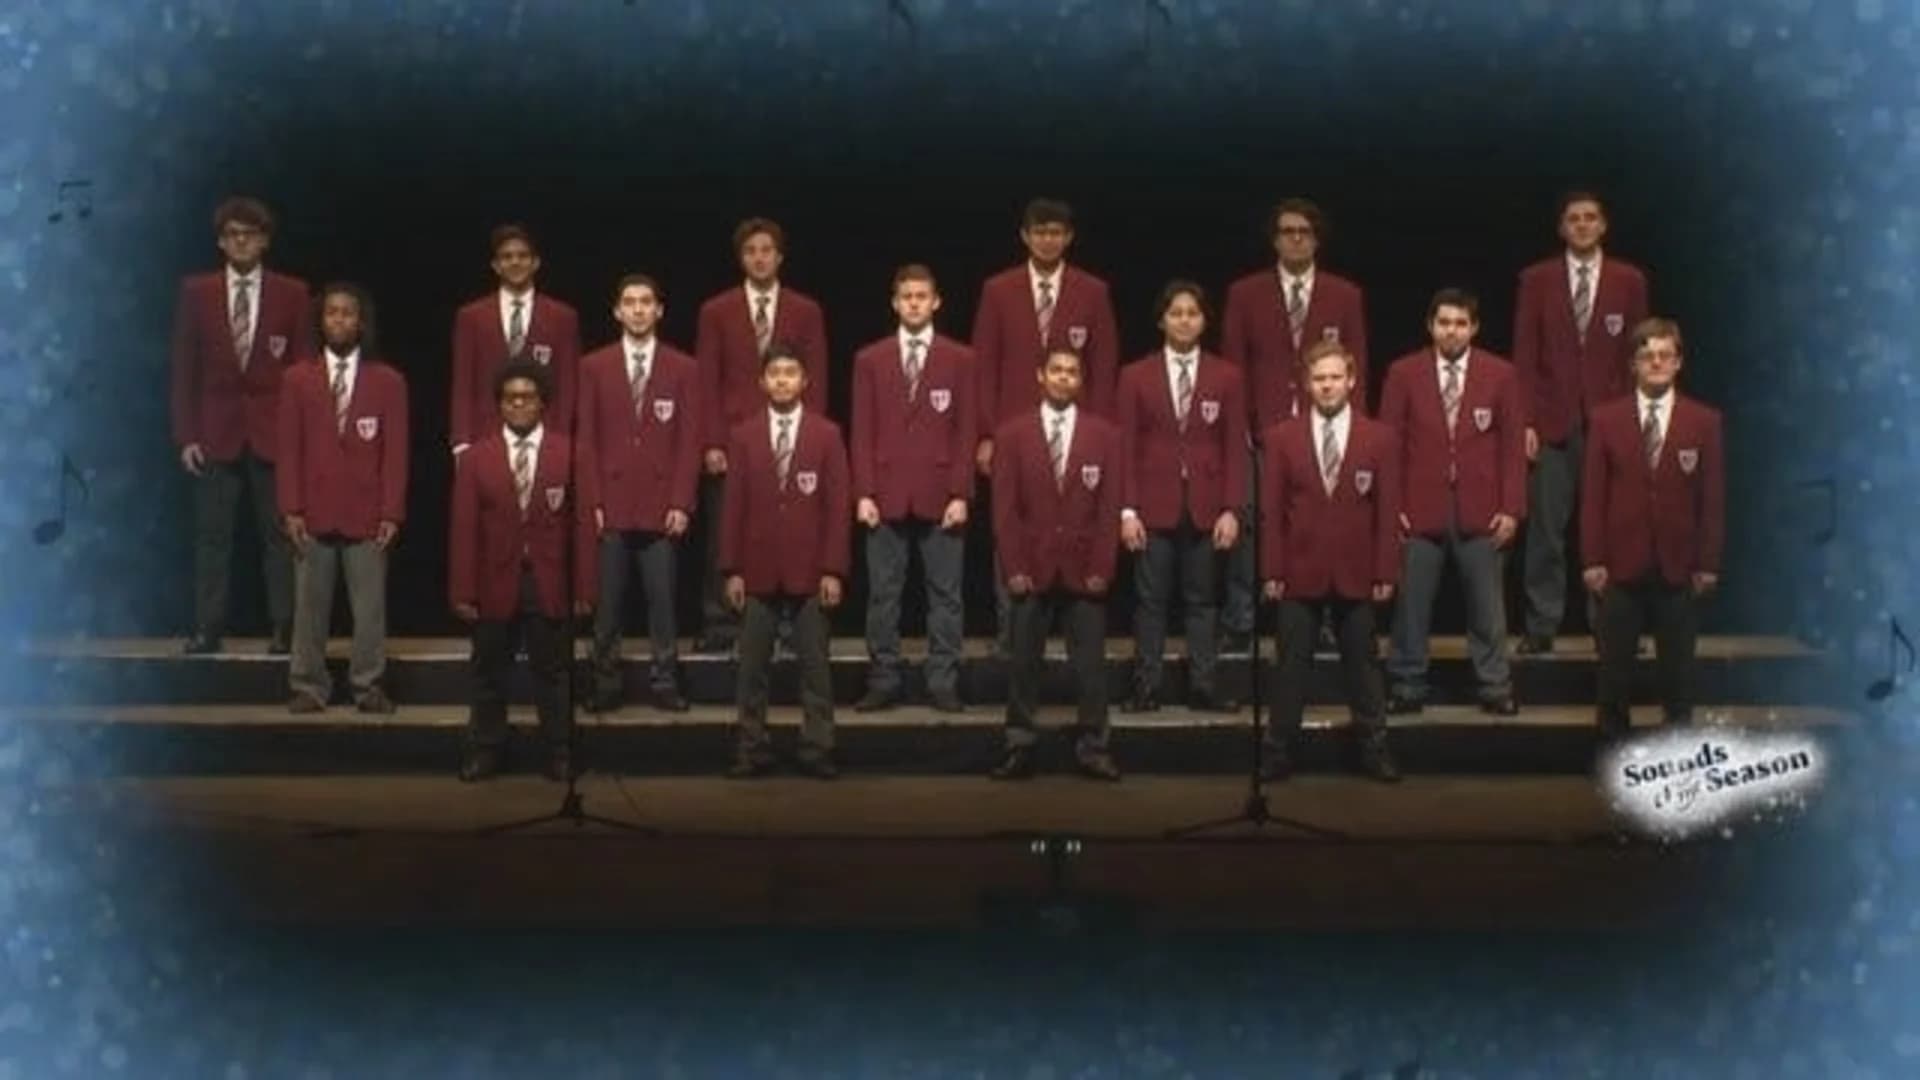 St. Peter’s Prep Vox performs Christmas songs